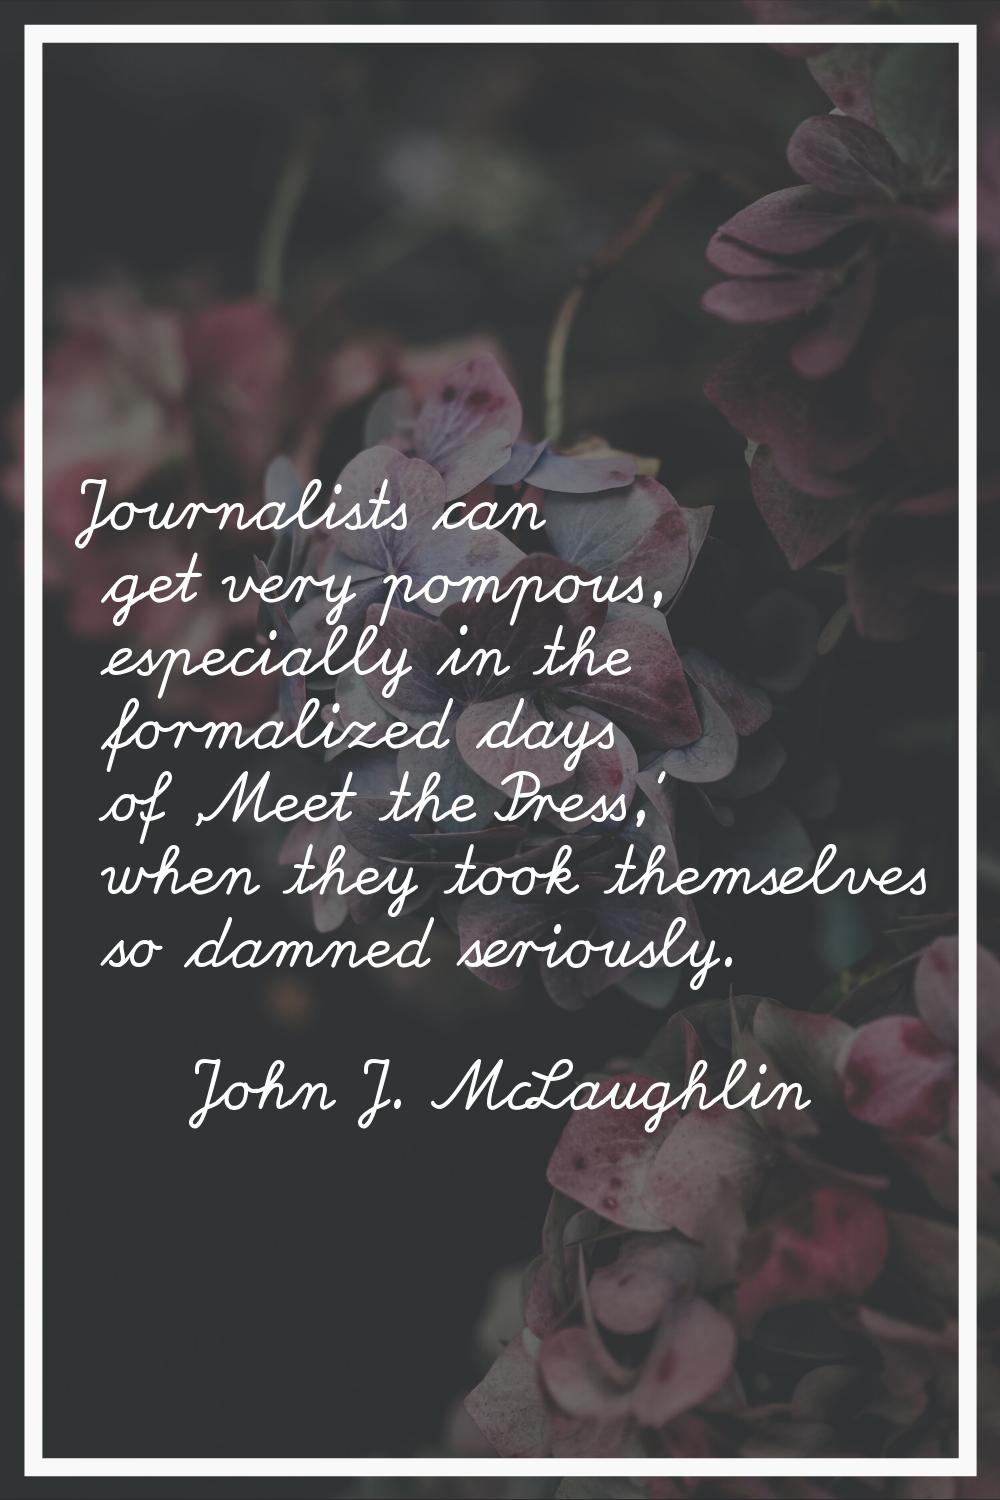 Journalists can get very pompous, especially in the formalized days of 'Meet the Press,' when they 